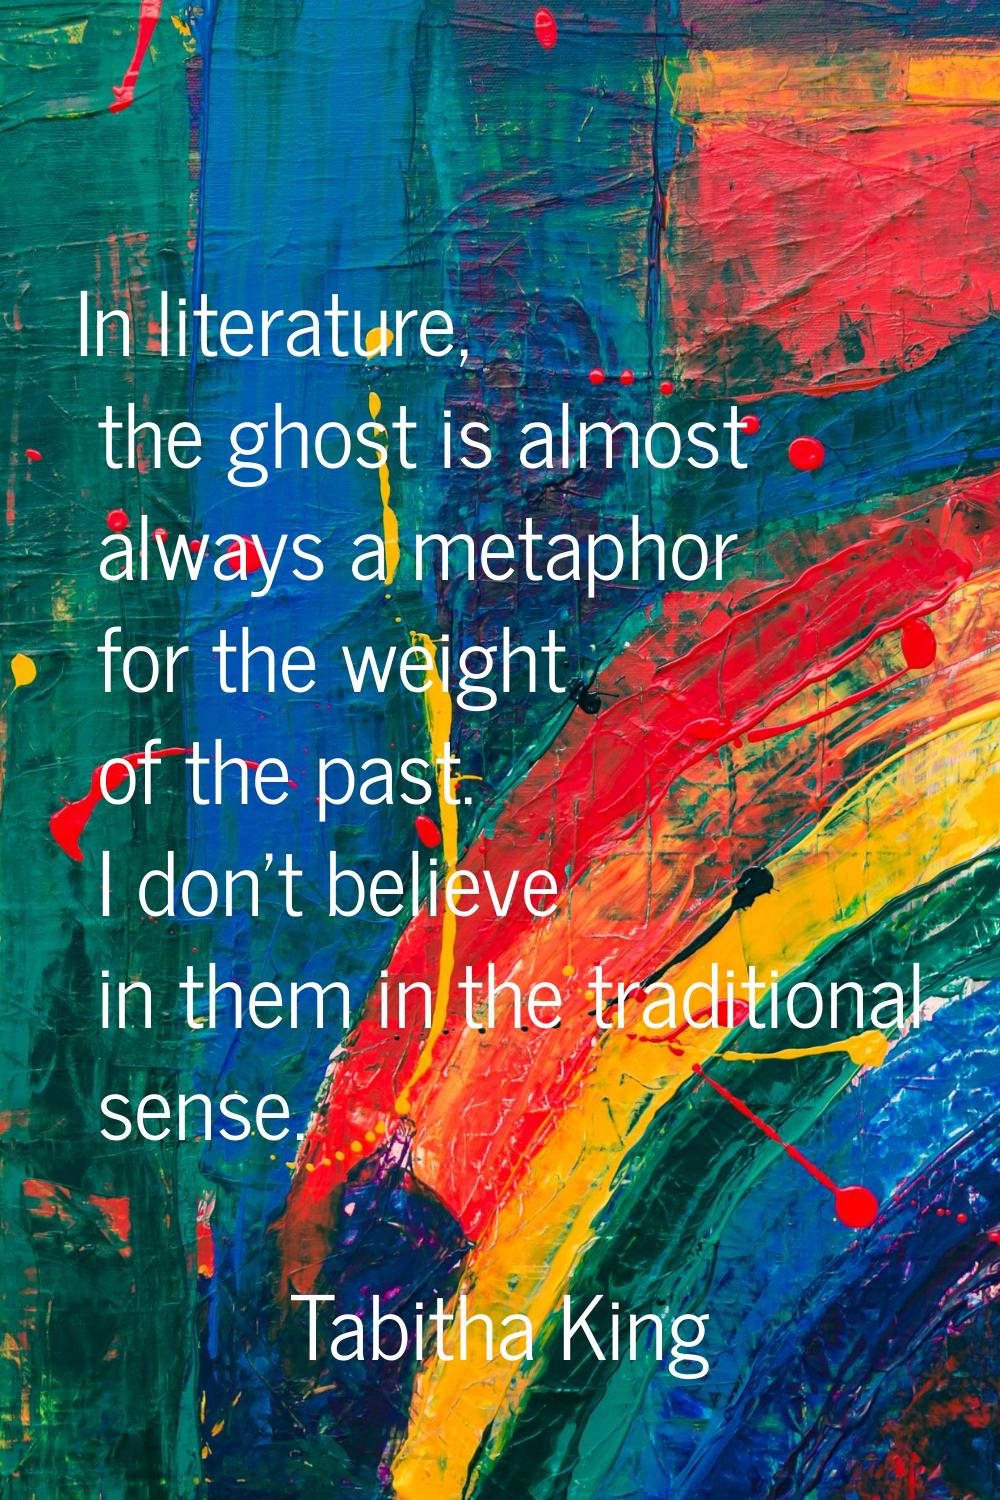 In literature, the ghost is almost always a metaphor for the weight of the past. I don't believe in